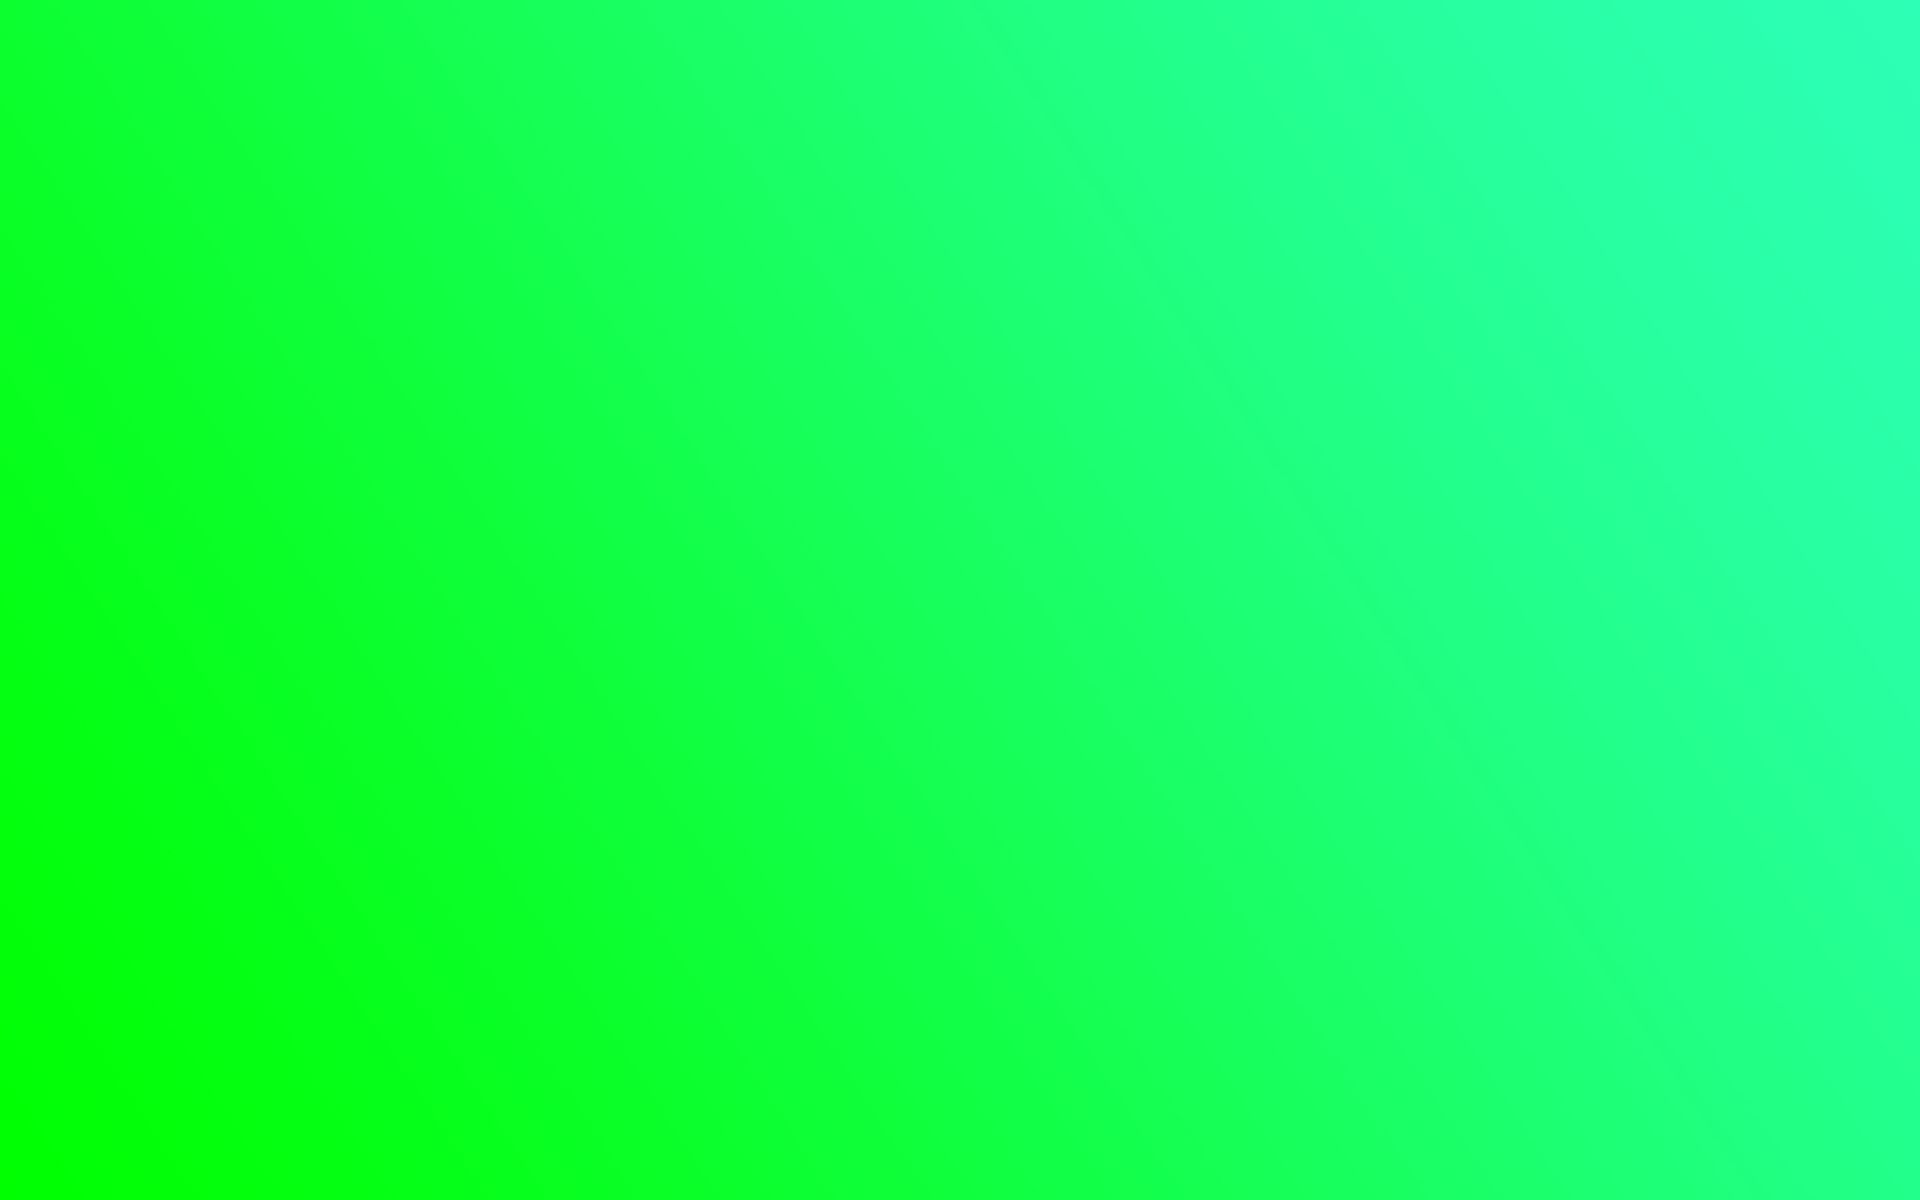 light, green, spots, abstract, shine, stains 2160p